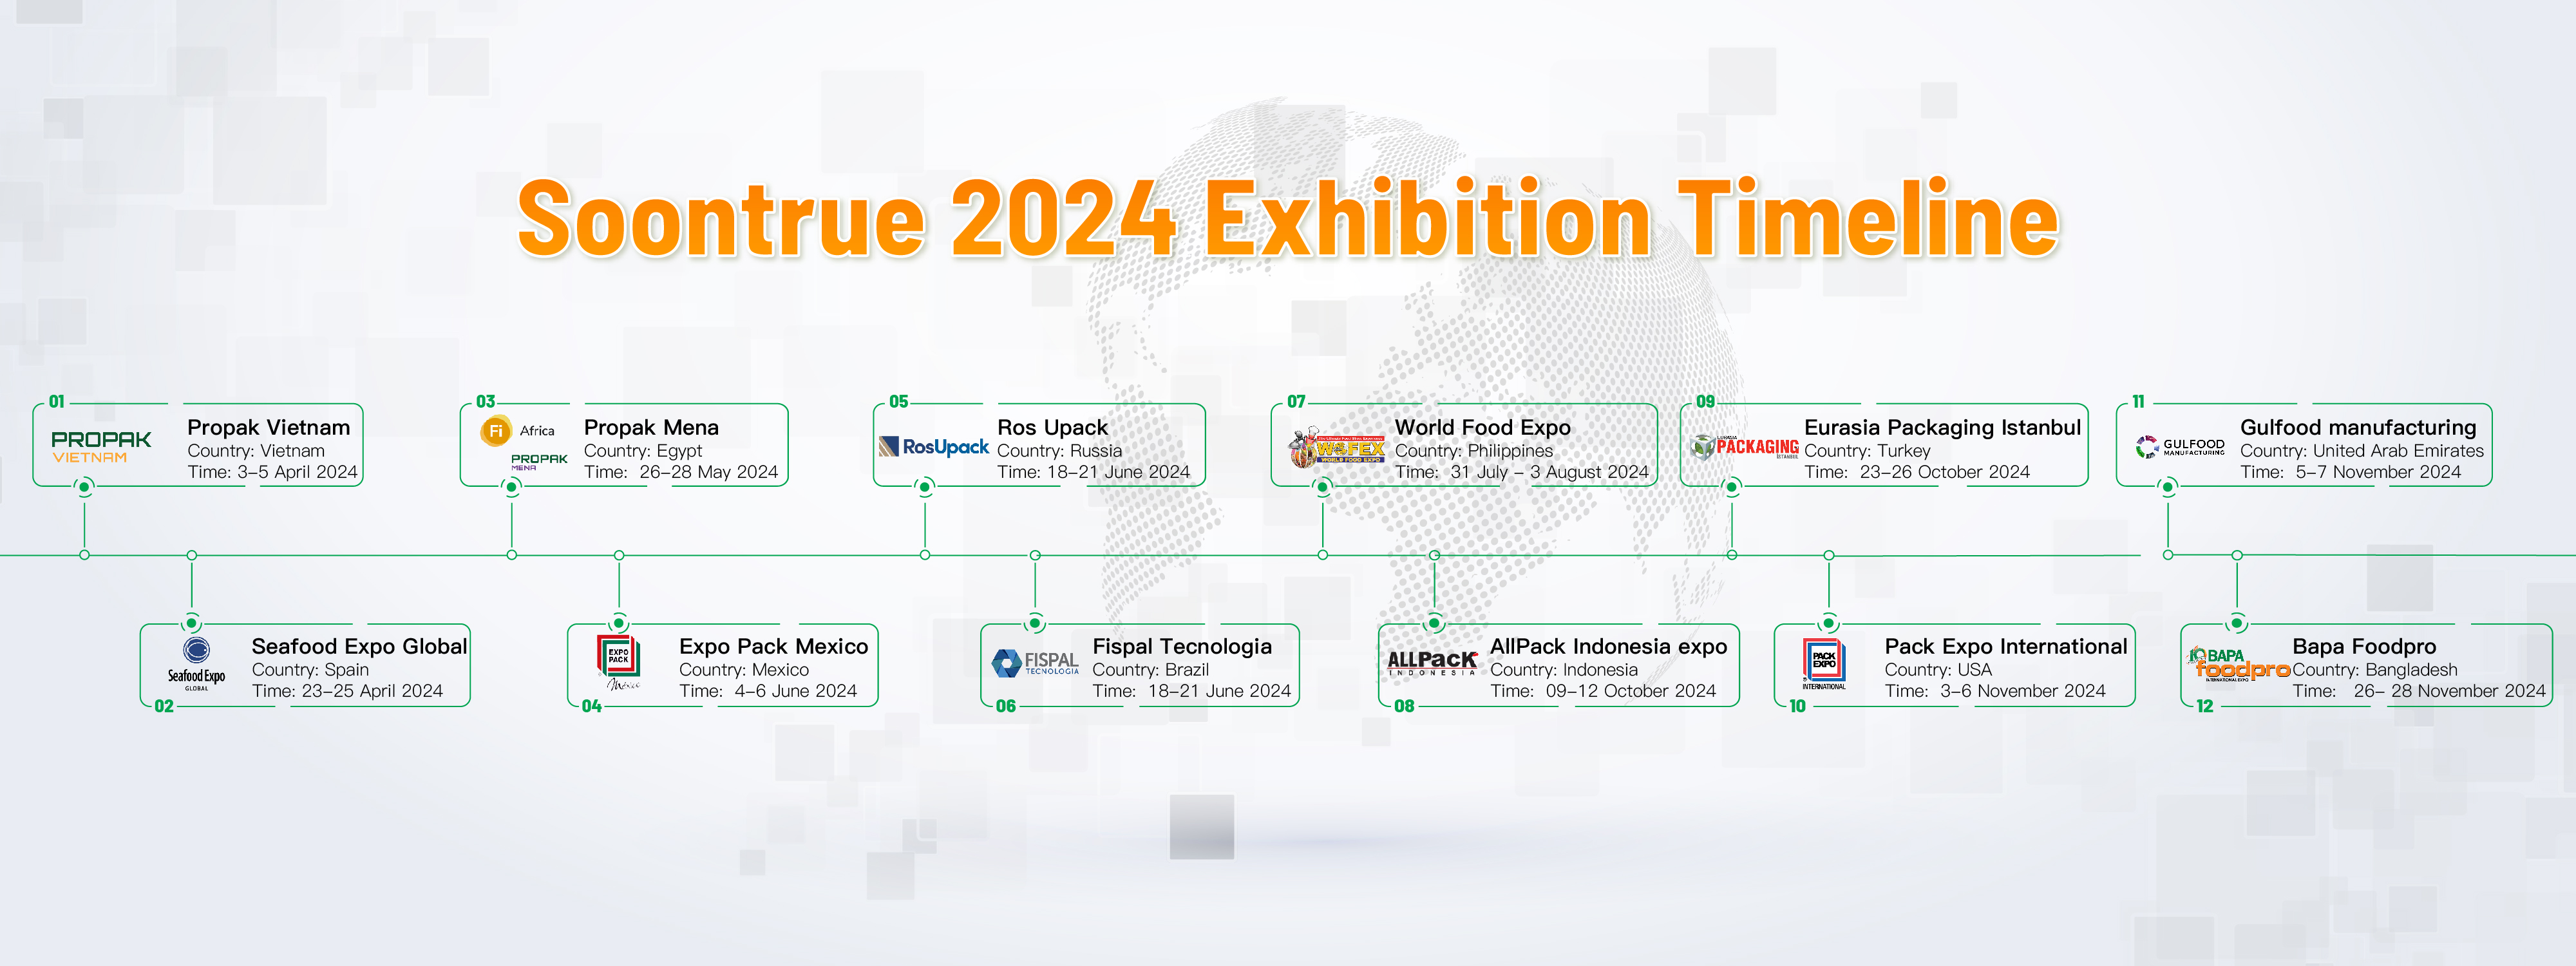 /article/soontrue-2024-exhibition-timeline-where-will-we-meet.html